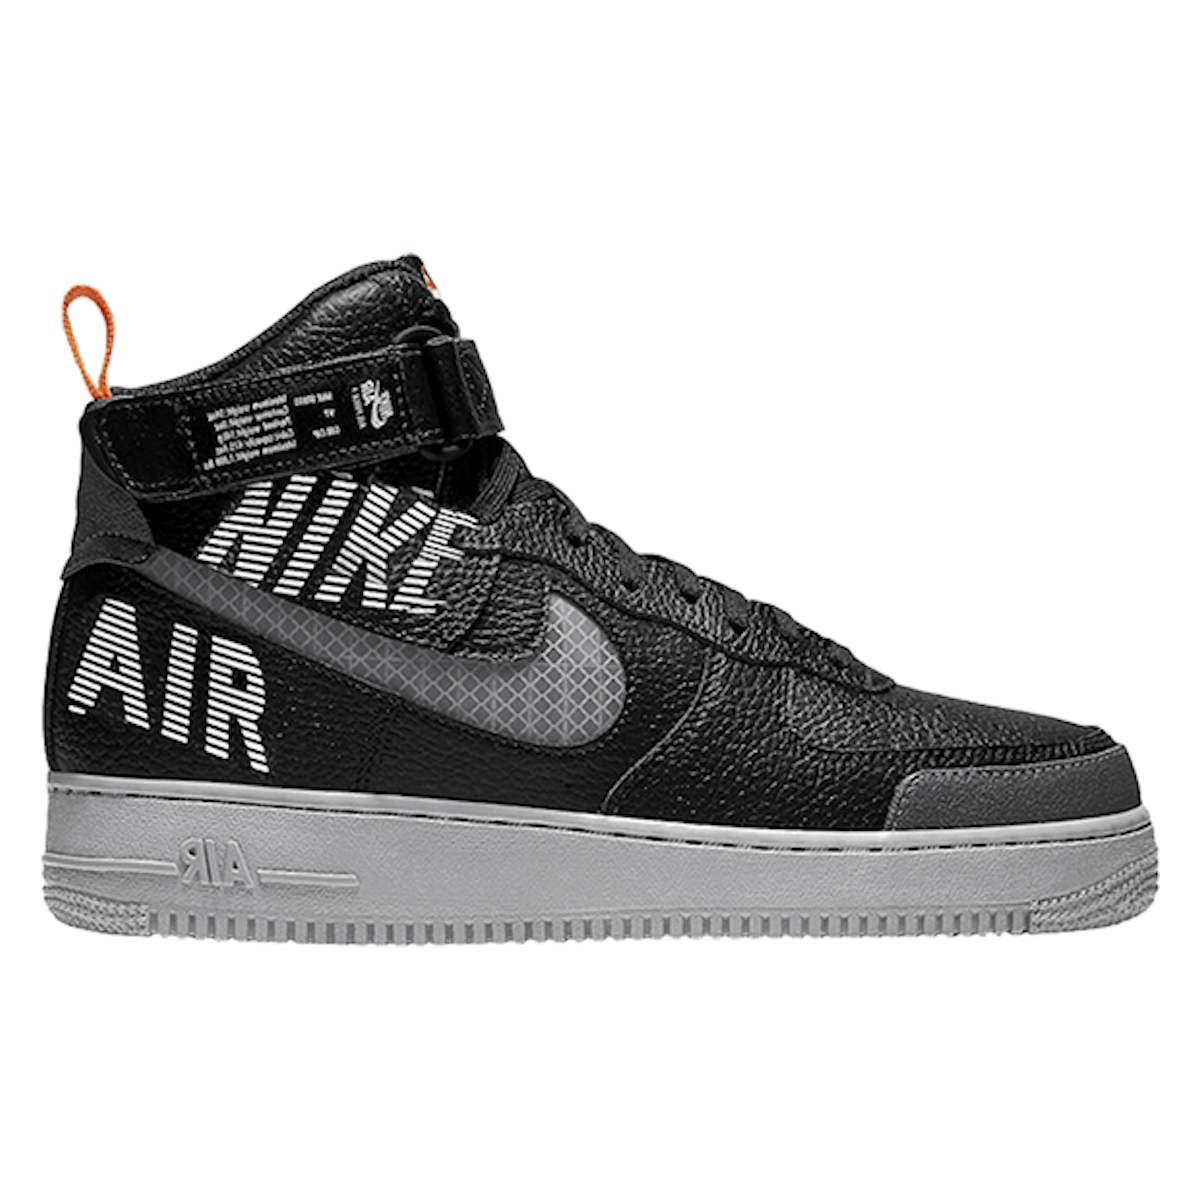 Nike Air Force 1 High "Under Construction - Black"